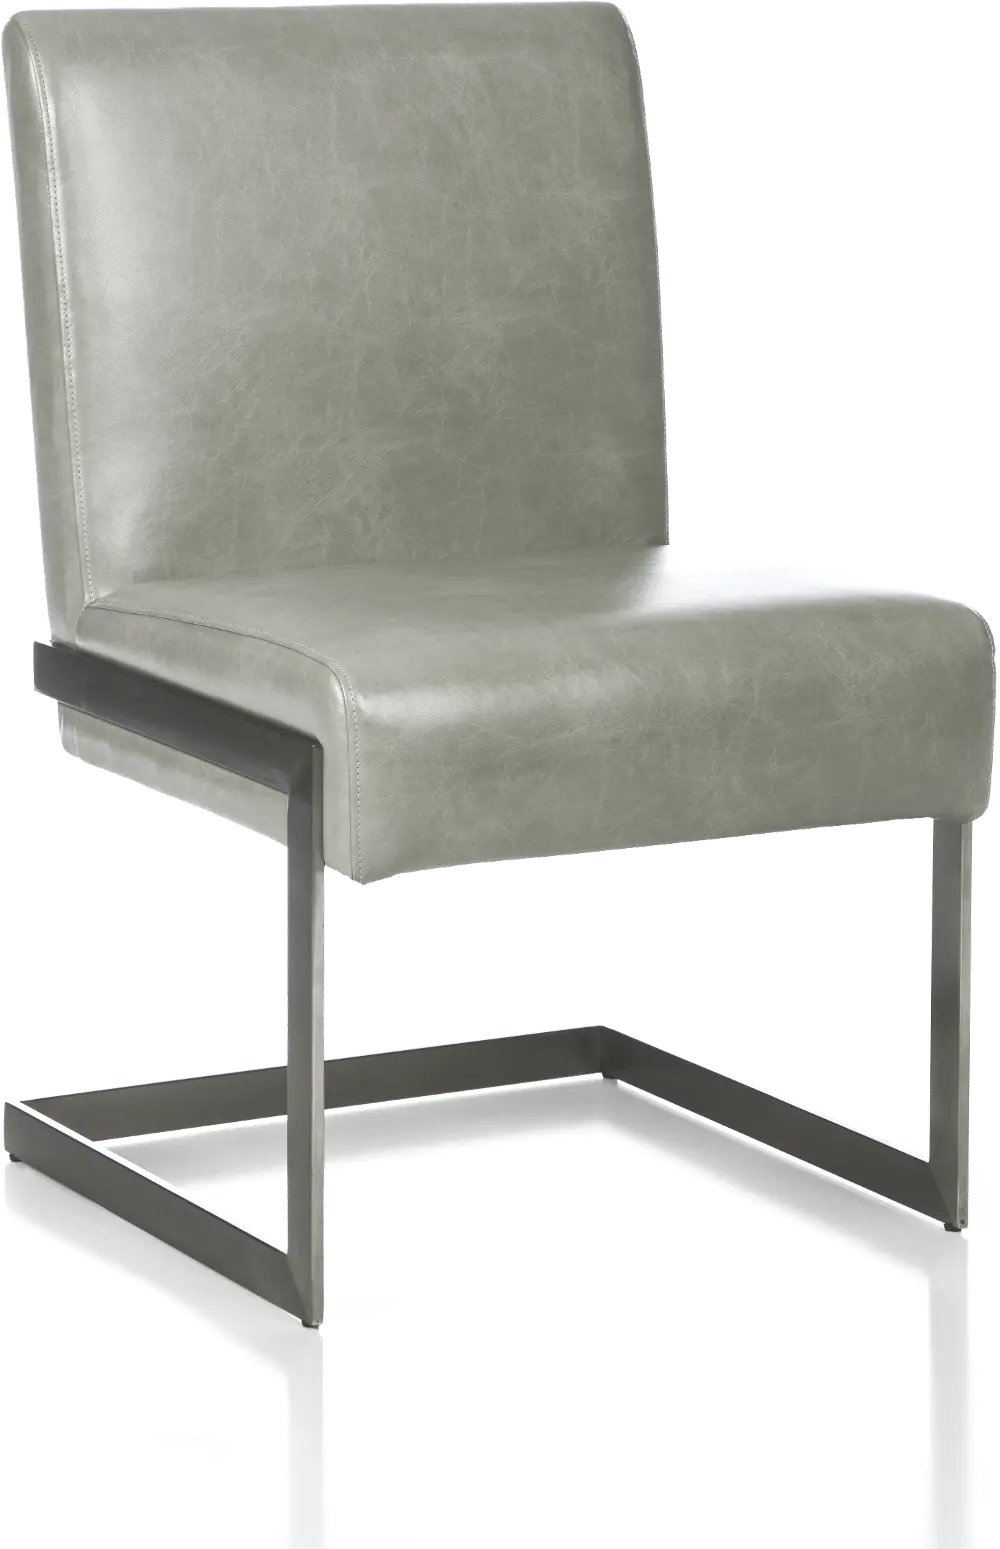 Modern Gray and Chrome Dining Room Chair - Coral-1